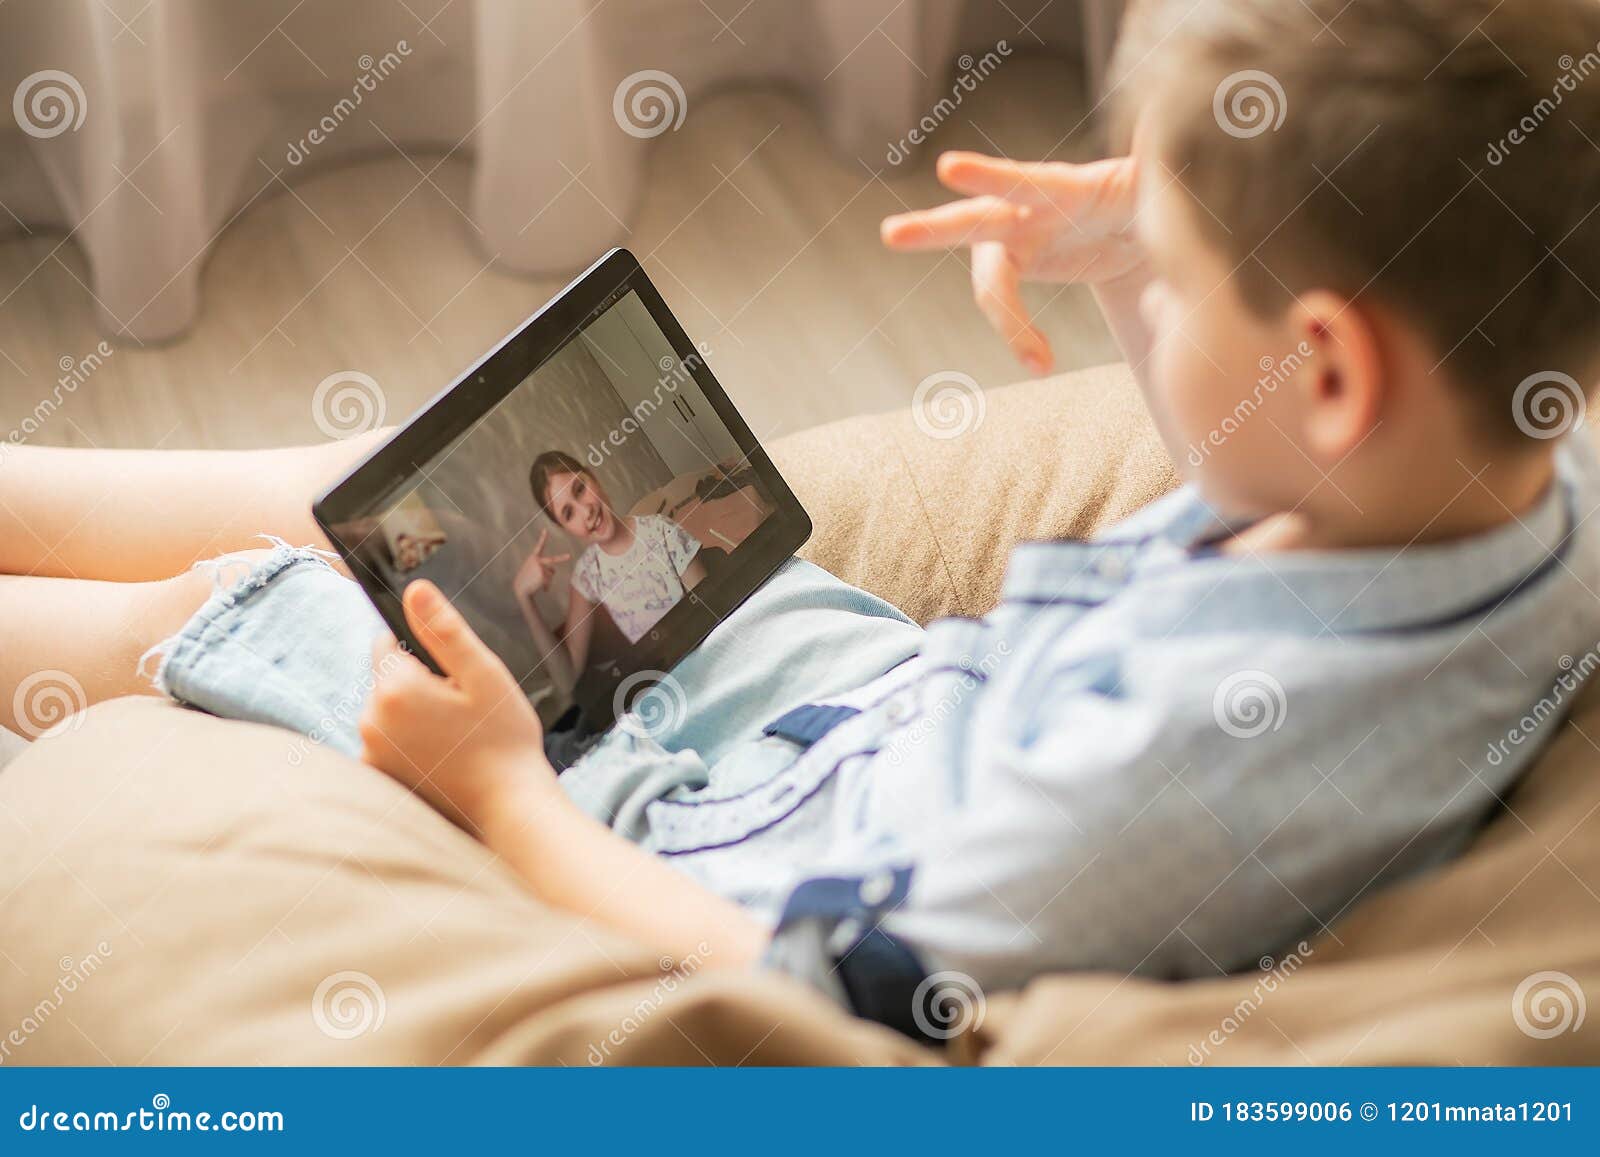 The Boy Communicates with His Girlfriend Online. Children Play a